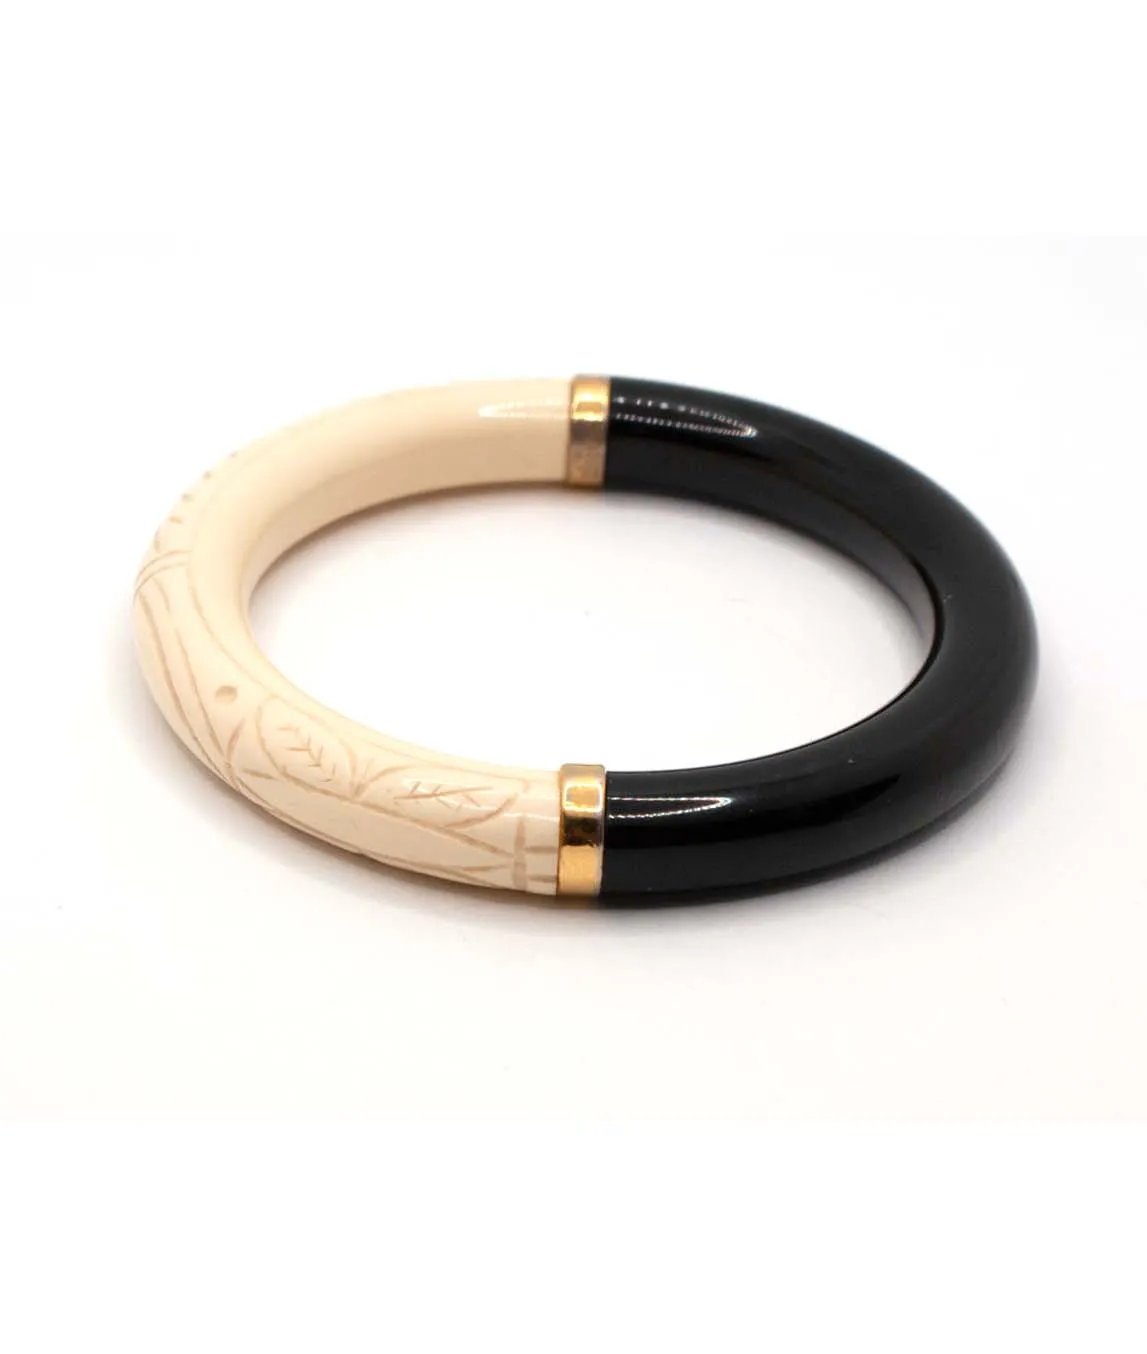 Sideview of black and carved ivory Givenchy bangle